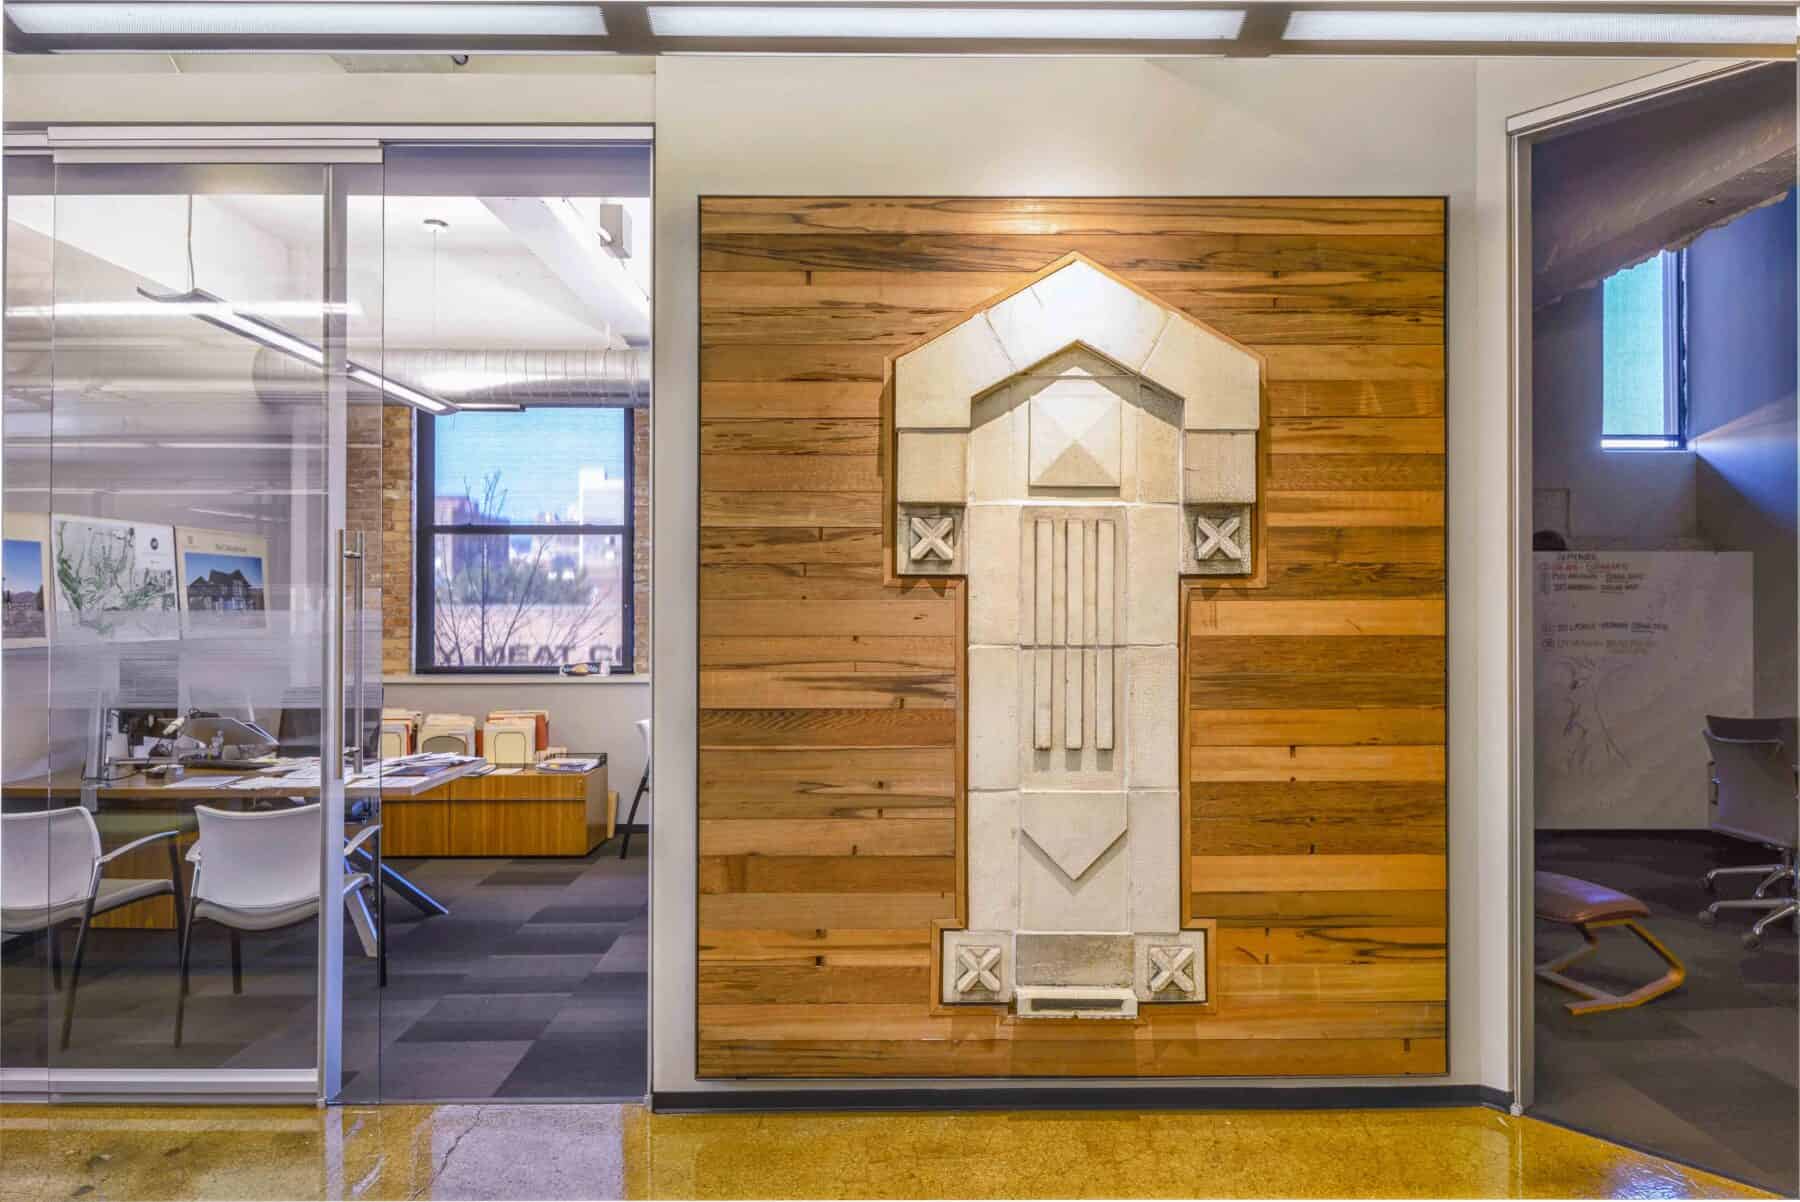 Historic Stone Artifact Restored and Encased in Custom Reclaimed Wood from Custom Featured Wall of Artifacts Encased in Reclaimed Wood from Construction Specialty Projects by Commercial Builder & General Contractor Structural Enterprises